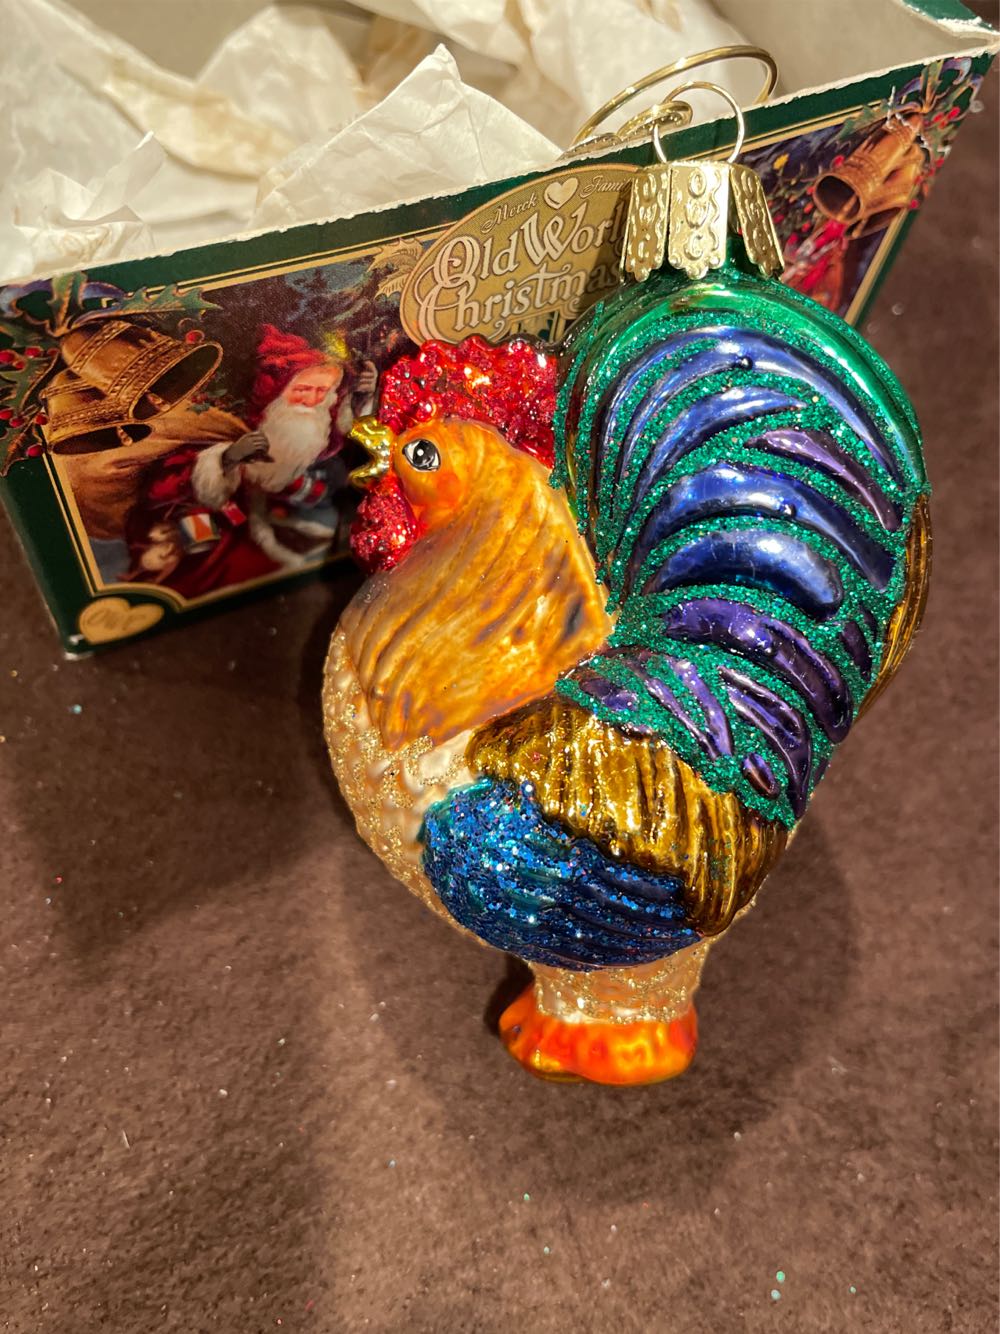 Rooster - Old World Christmas - Old World (Christmas) ornament collectible - Main Image 1